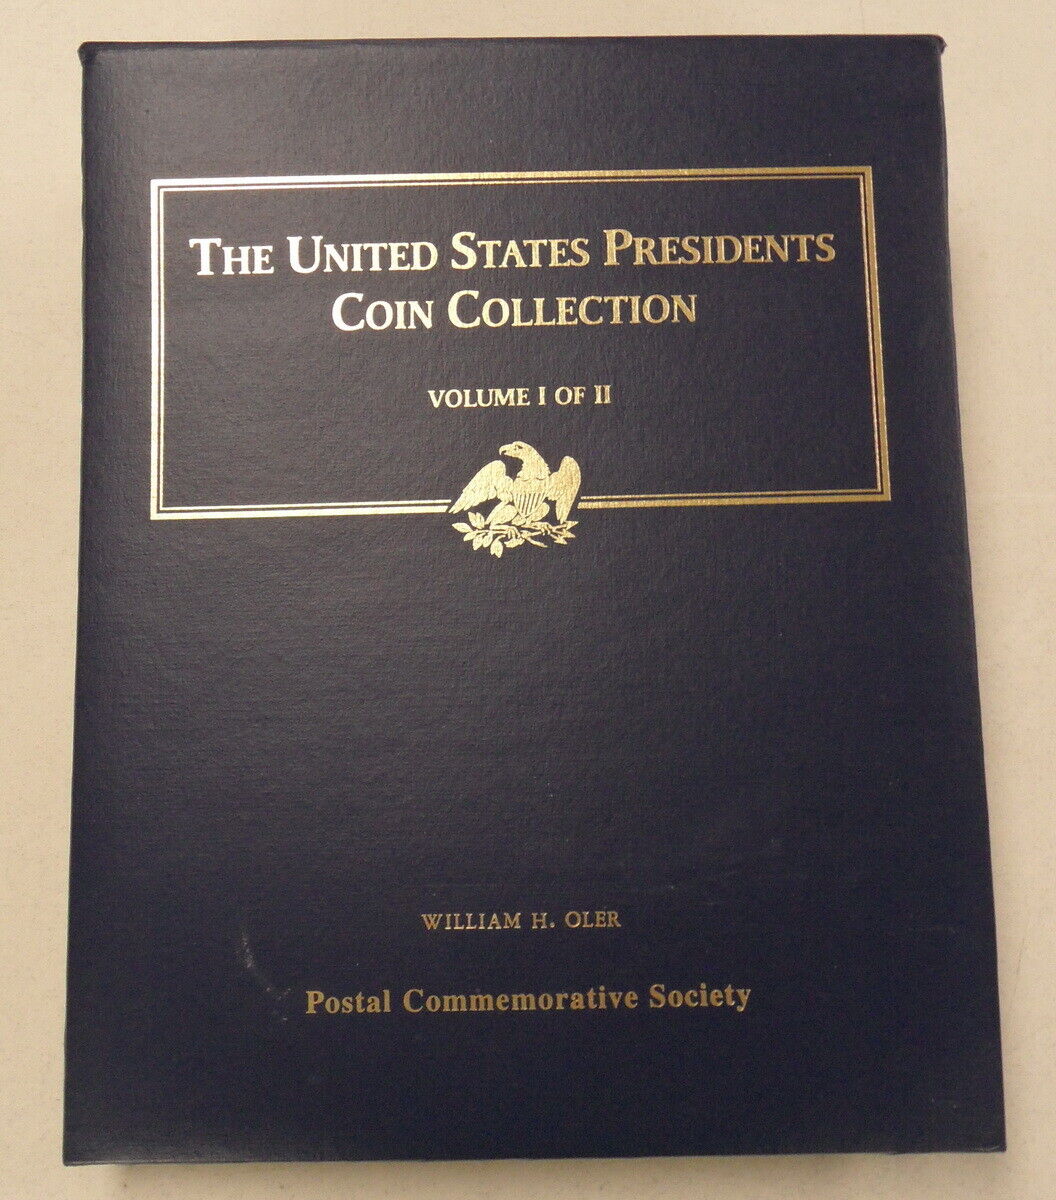 The United States Presidents Coin Collection Volume I Large Book Set ~ Free Ship